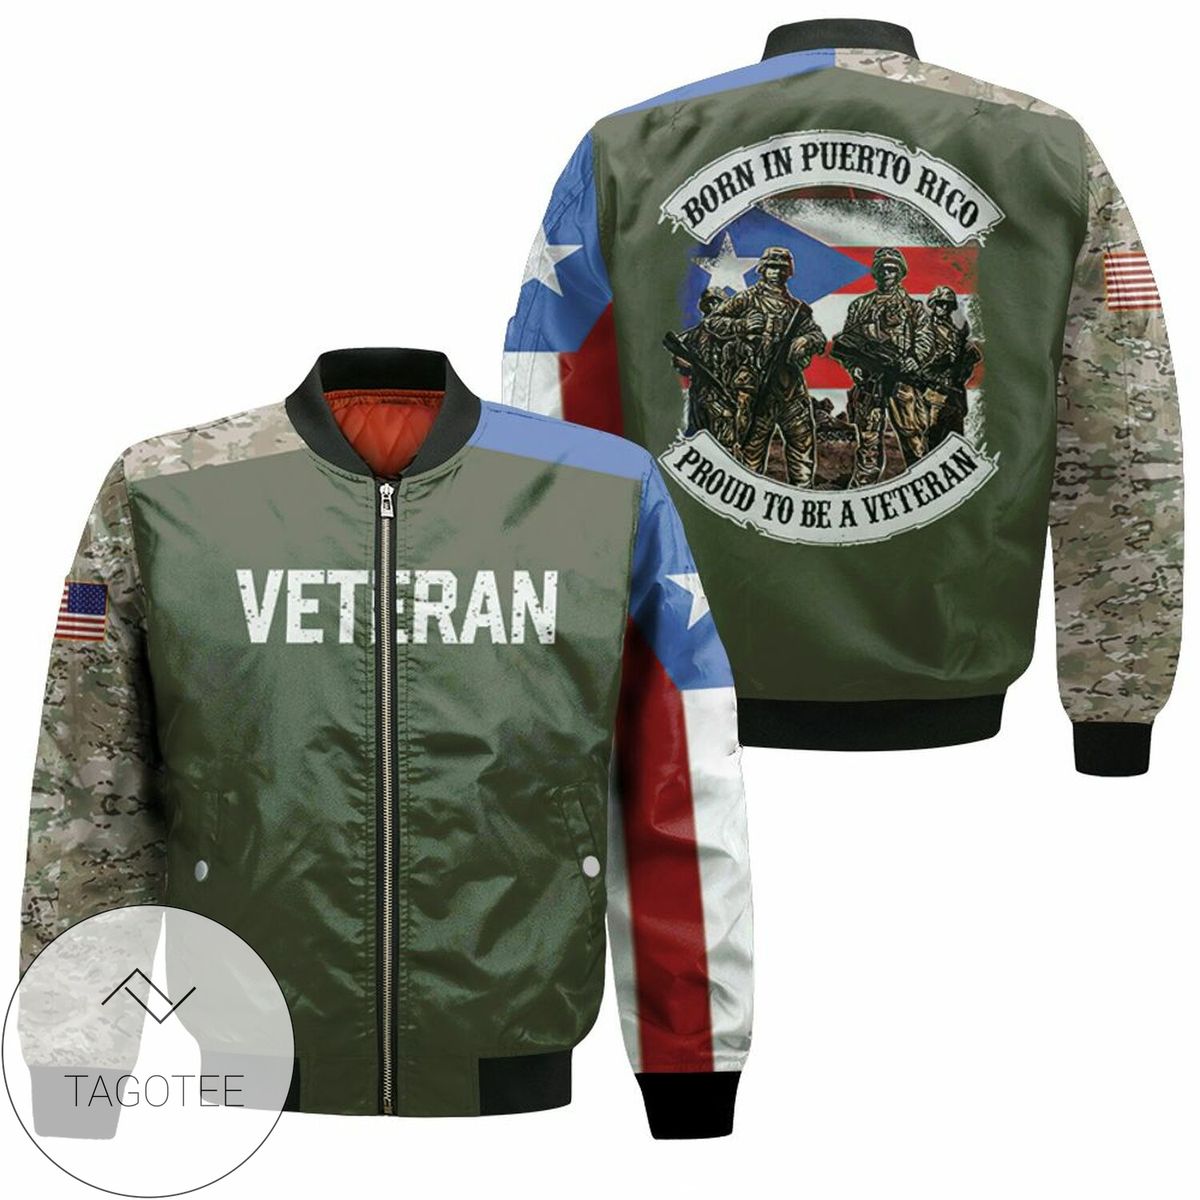 Born In Puerto Rico Proud To Be A Veteran Camouflage Design 3D Printed T Shirt Jersey Bomber Jacket